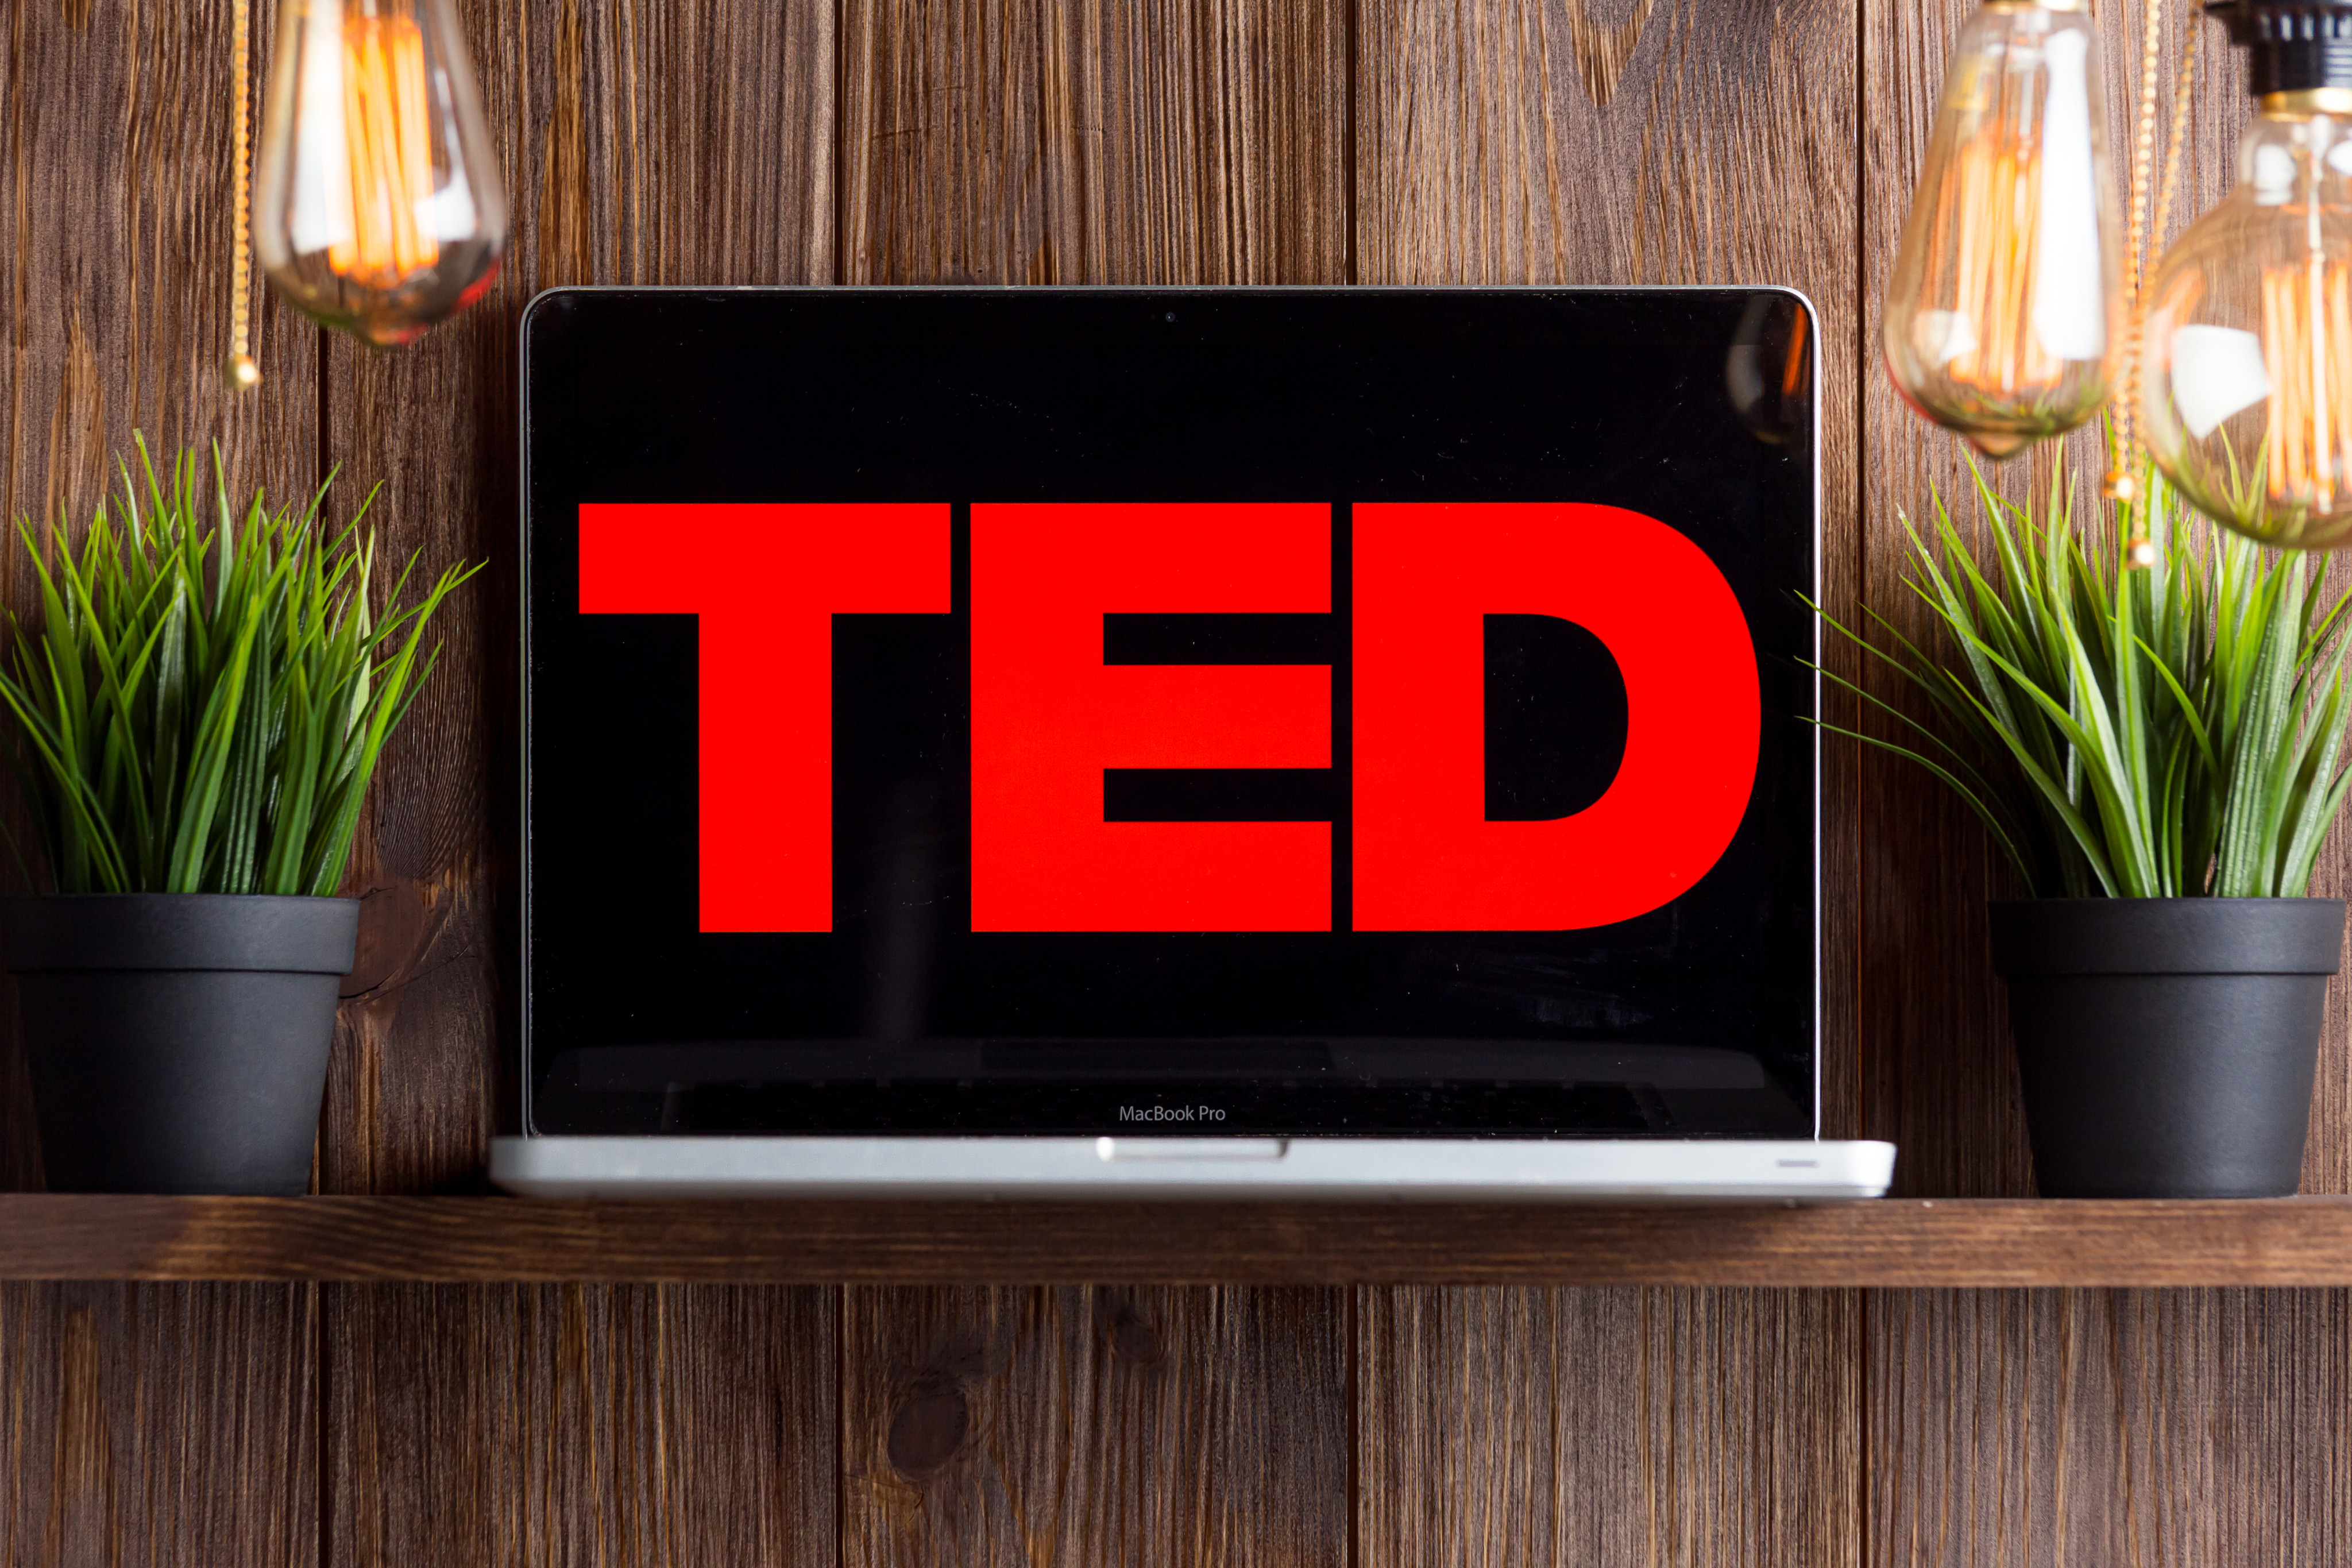 TEDx allows volunteers around the world to organise their own licensed TED talks, which must be not-for-profit events.  Photo: Shutterstock